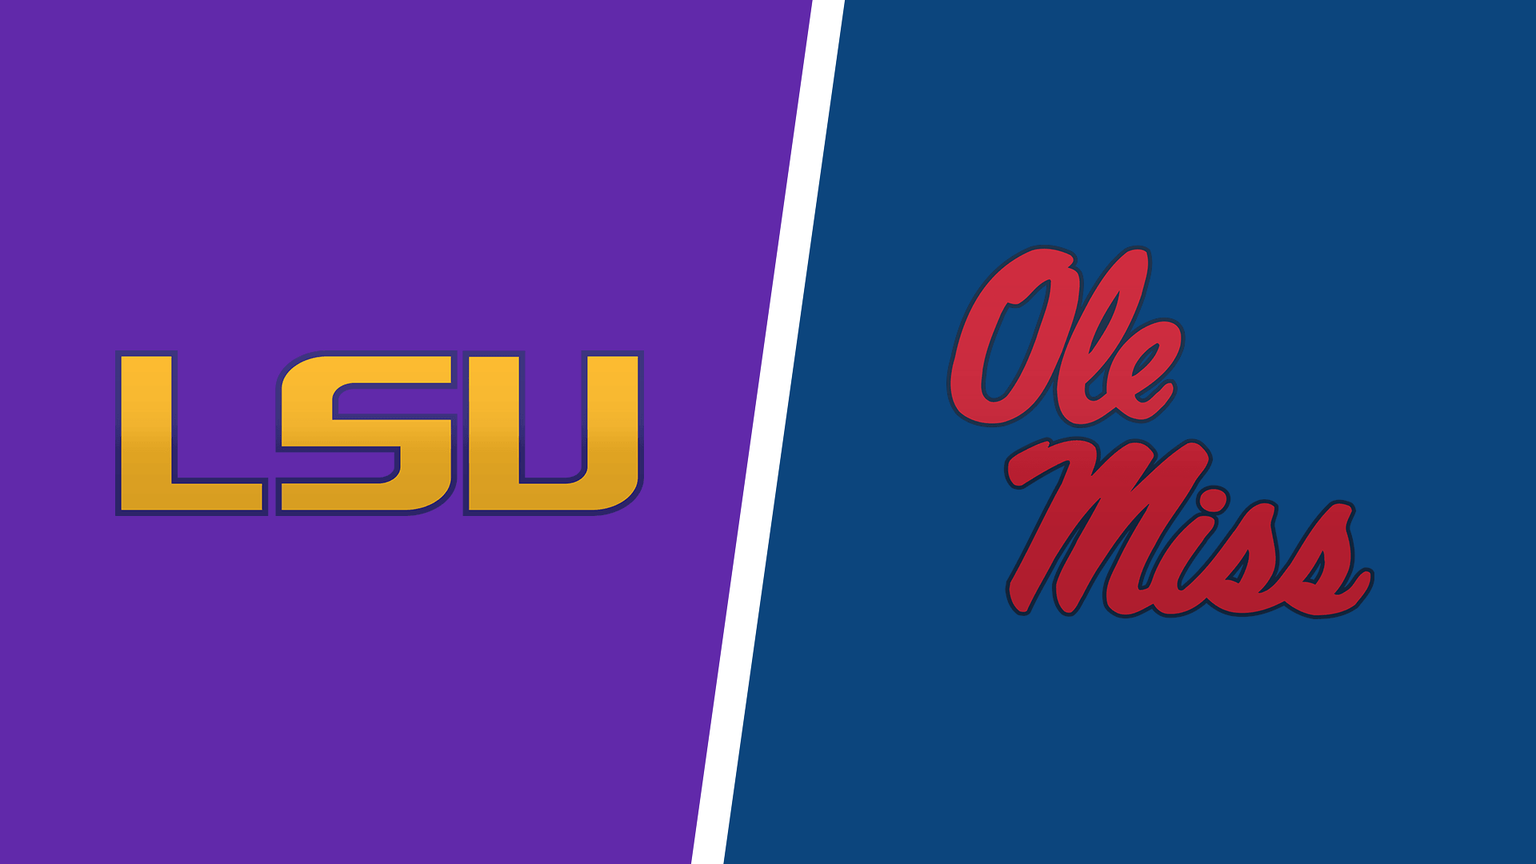 How to Watch Ole Miss vs. LSU Live Online on October 22, 2022 TV